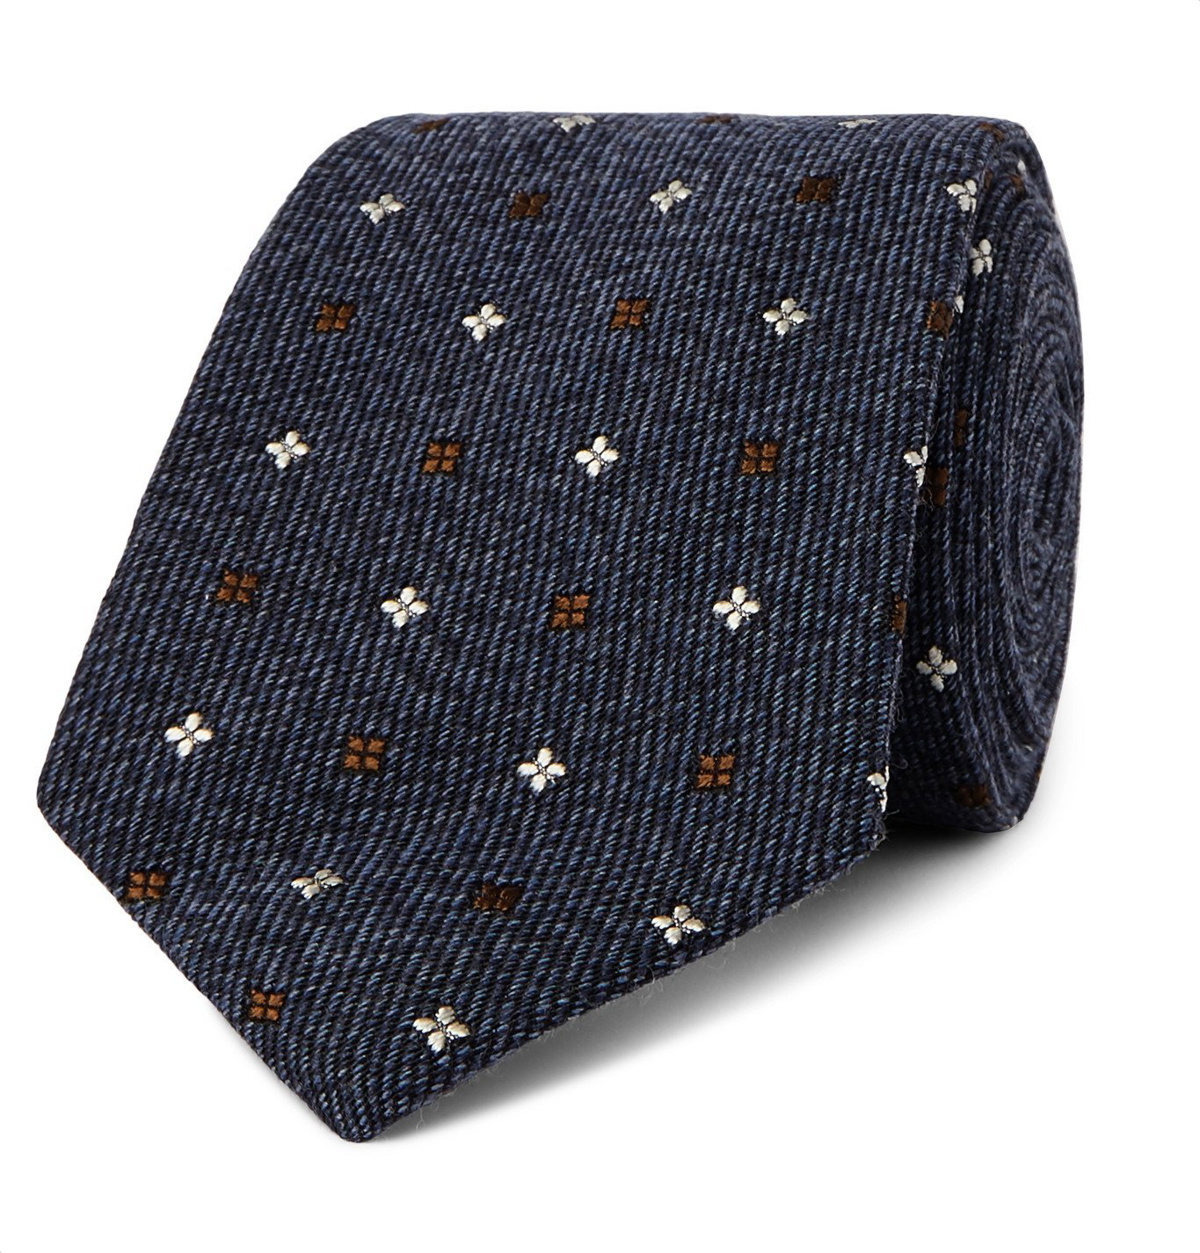 Kingsman - Drake's 7.5cm Embroidered Wool and Silk-Blend Tie - Blue ...